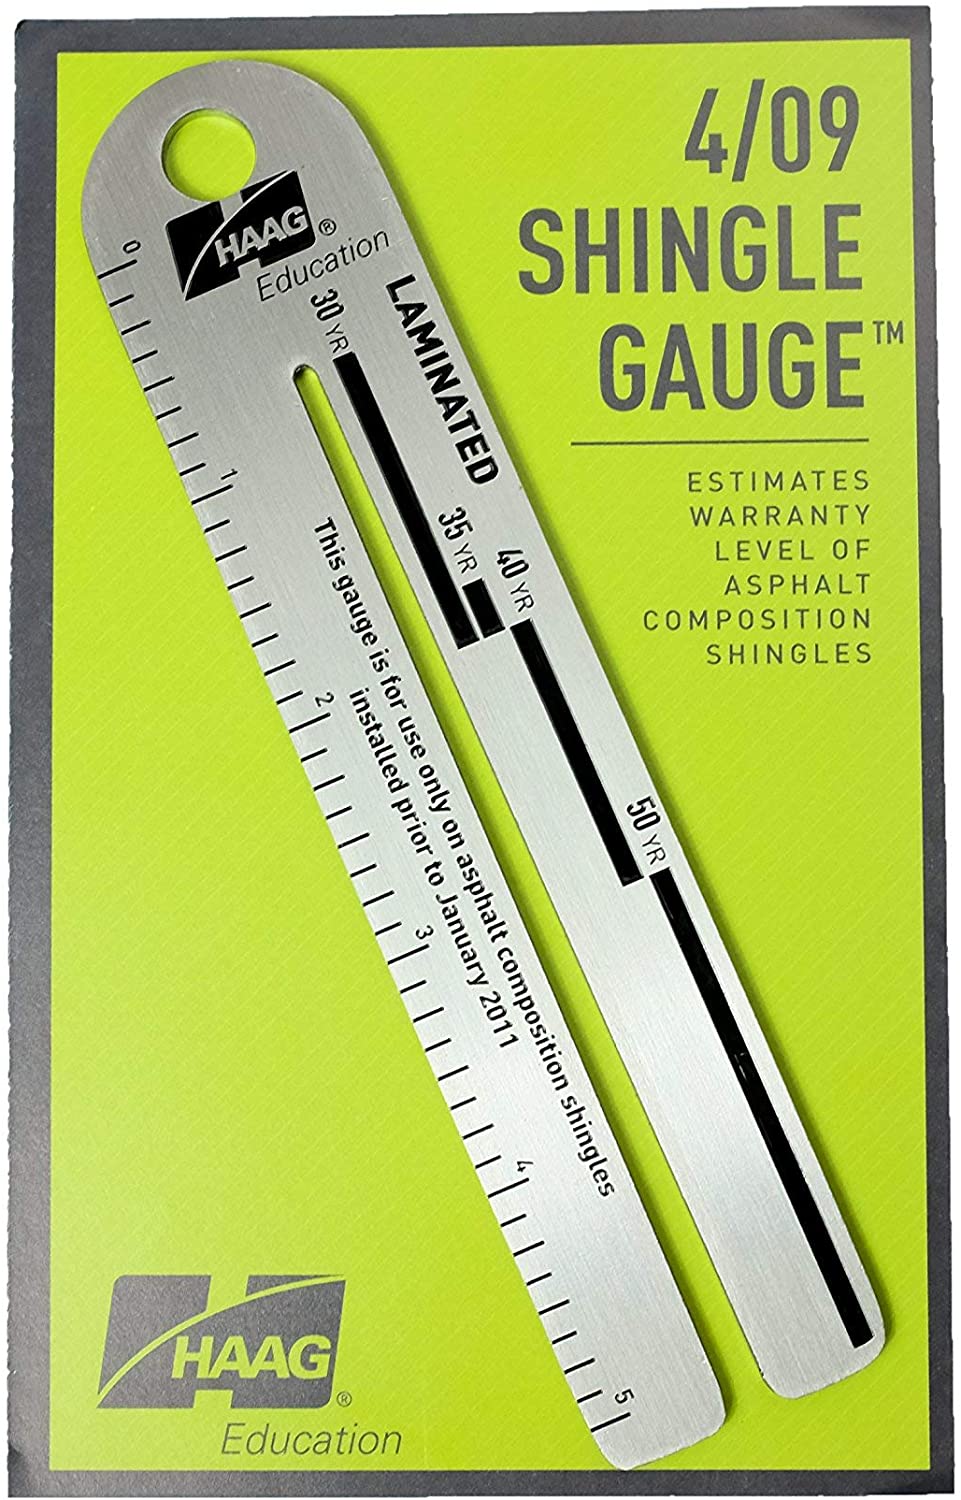 Haag Engineering 4/09 Shingle Gauge, Includes a key card with Haag Company information and basic instructions.